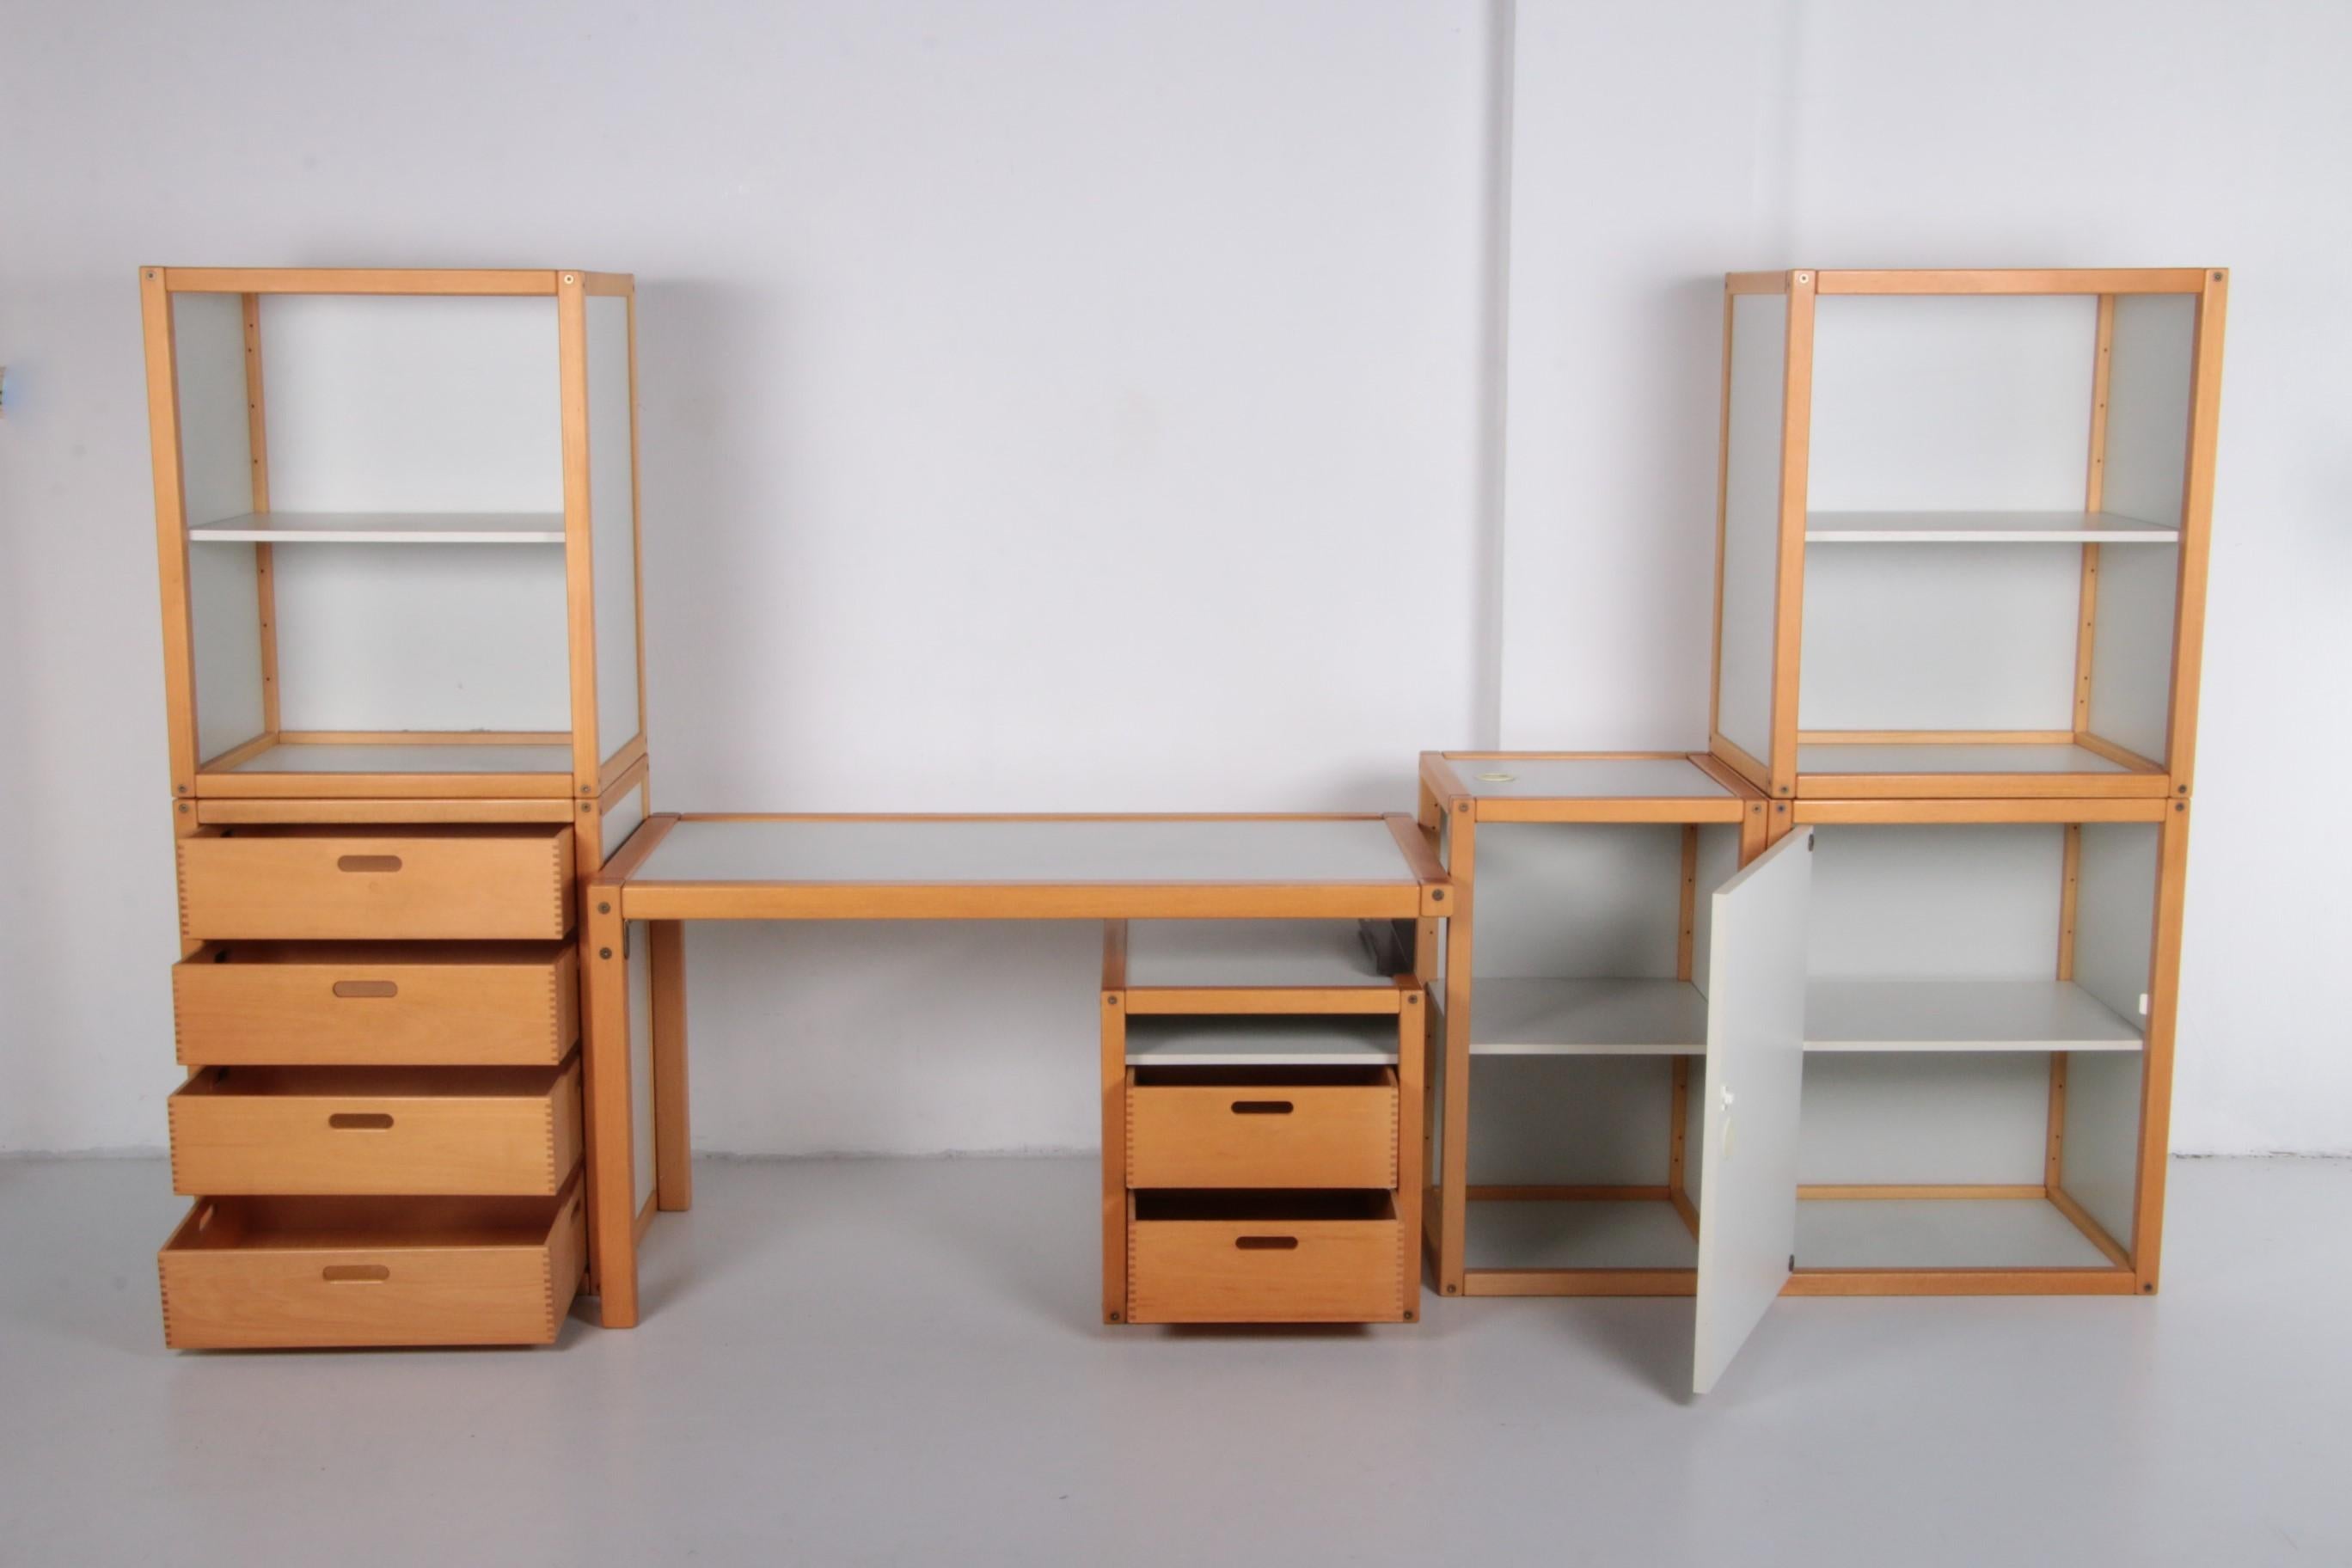 This German desk is part of the Profilsystem collection, designed by Elmar Flötotto for the Flötotto brand in the 1980s. 

The principle behind the Profilesystem is simple. The set comes with different elements that you can place exactly as you